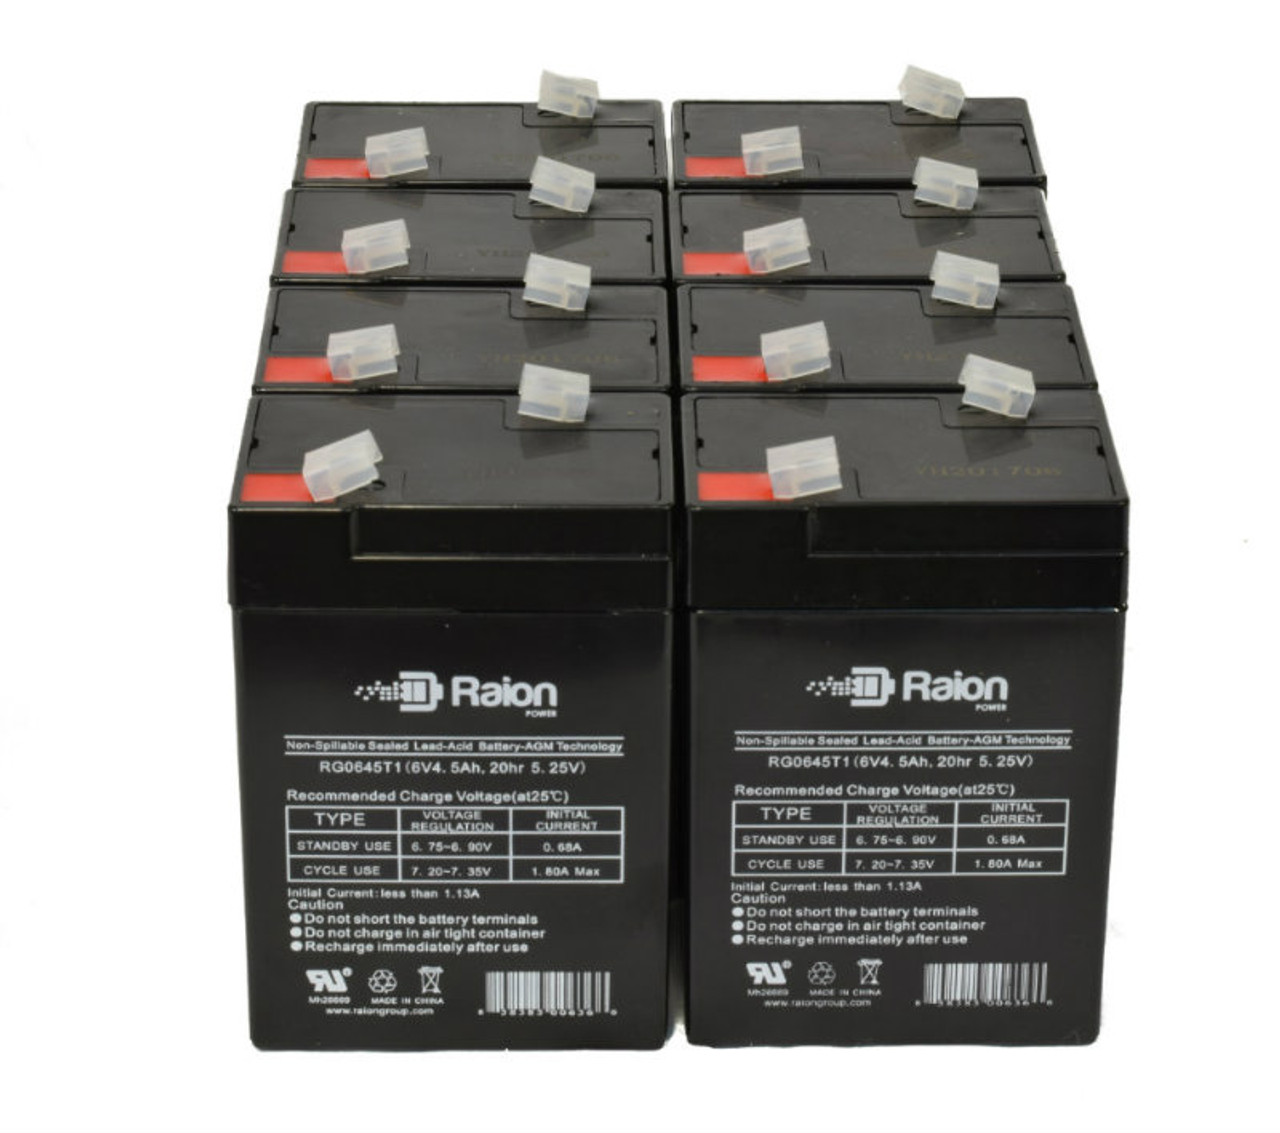 Raion Power 6V 4.5Ah Replacement Emergency Light Battery for Lithonia ELM Series - 8 Pack